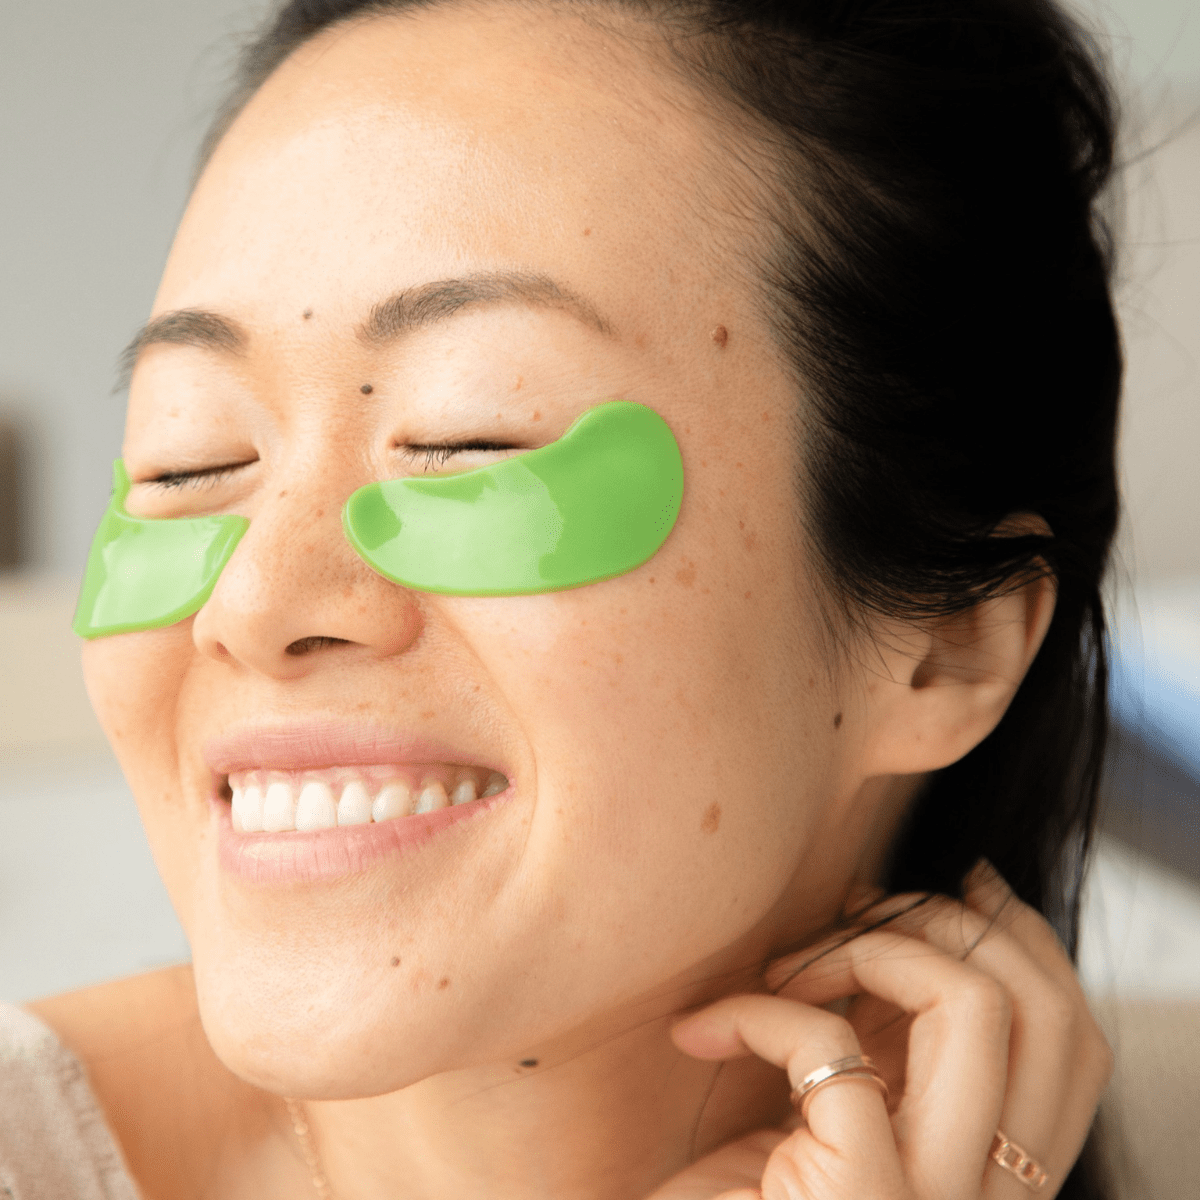 100 Percent Pure Bright Eyes Mask 5 Pack - The Green Kiss